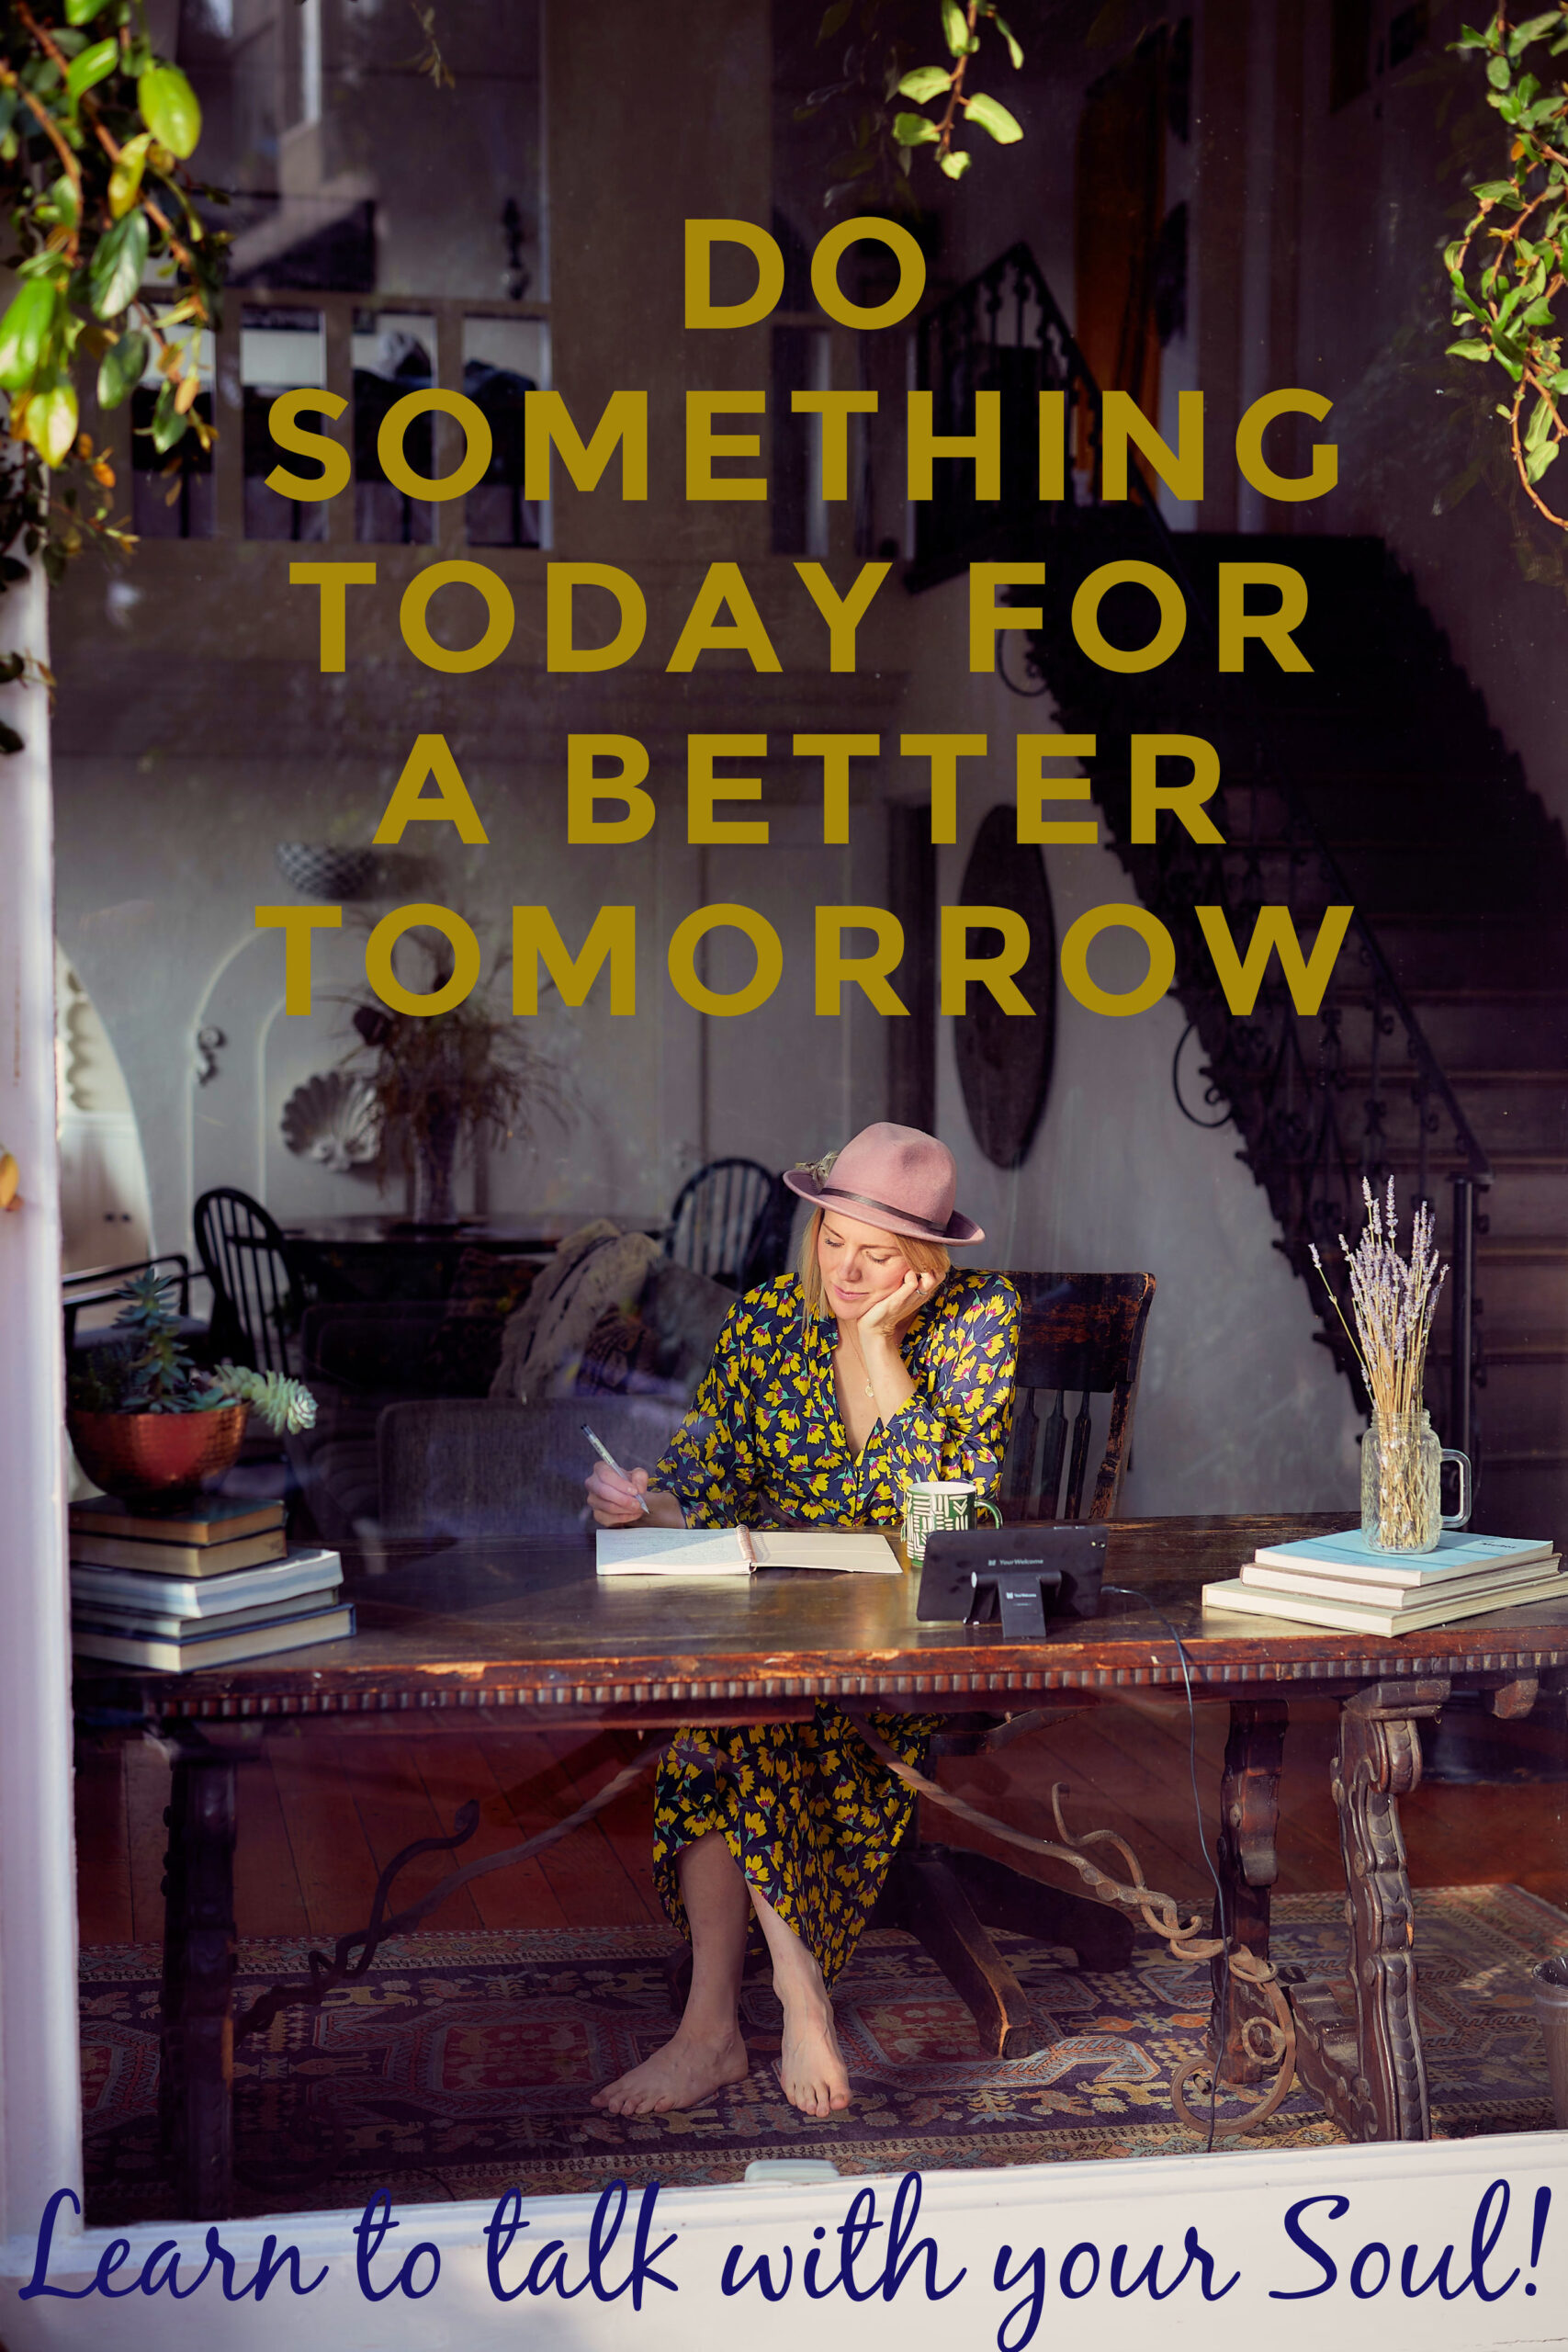 Image of woman journaling at her desk with the caption "Do Something Today for a Better Tomorrow - Learn to Talk with Your Soul"